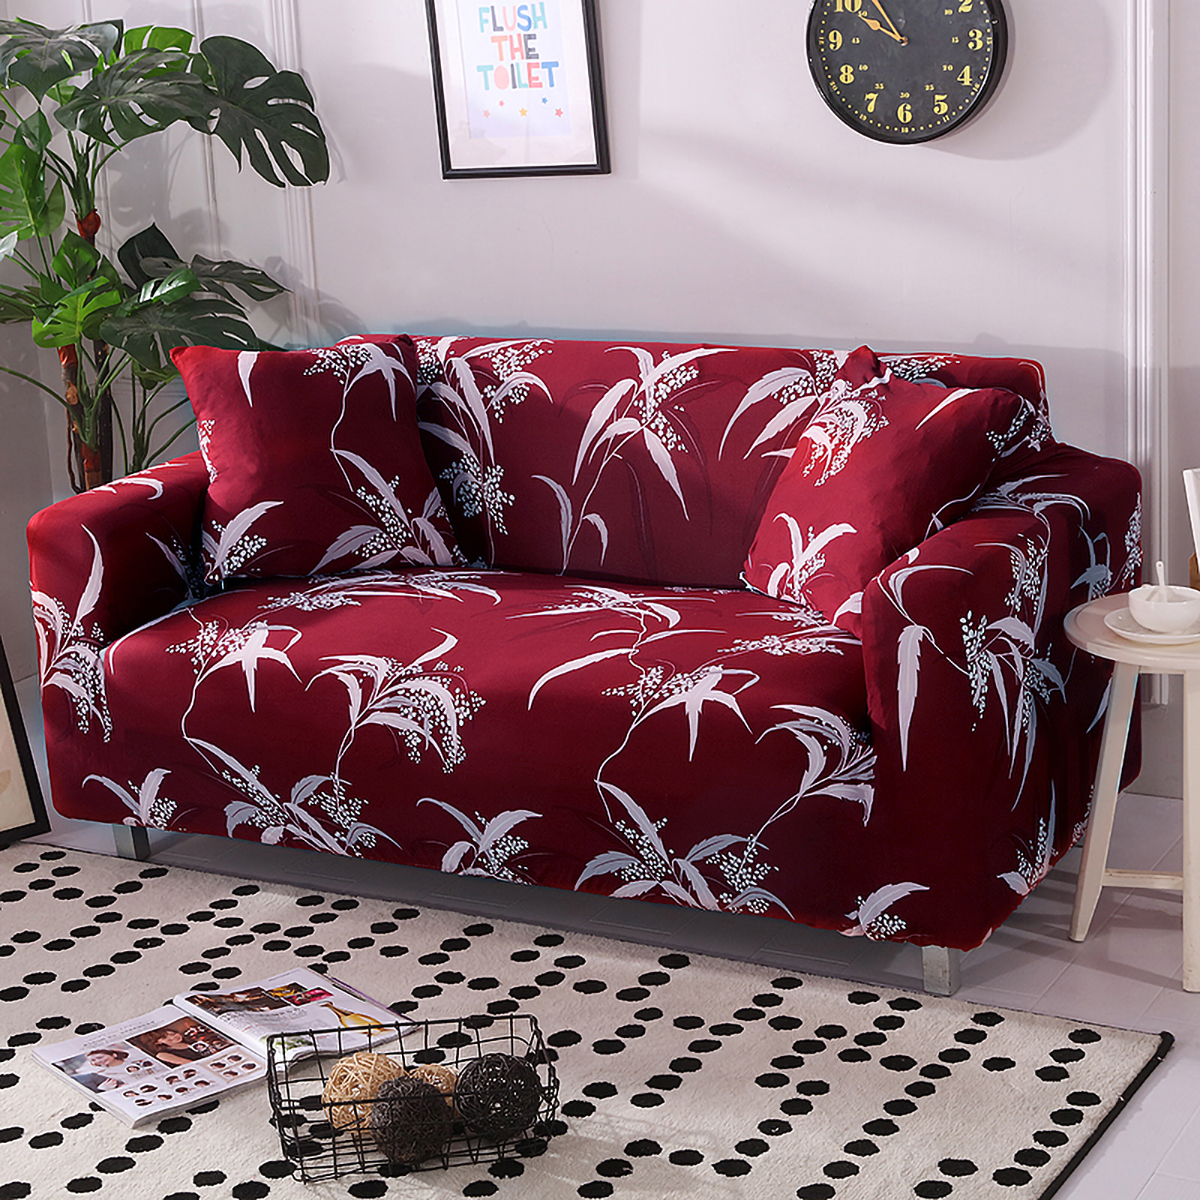 Details about   Stretch Chair Sofa Covers 1 2 3 4Seater Protector Washable Couch Cover Slipcover 